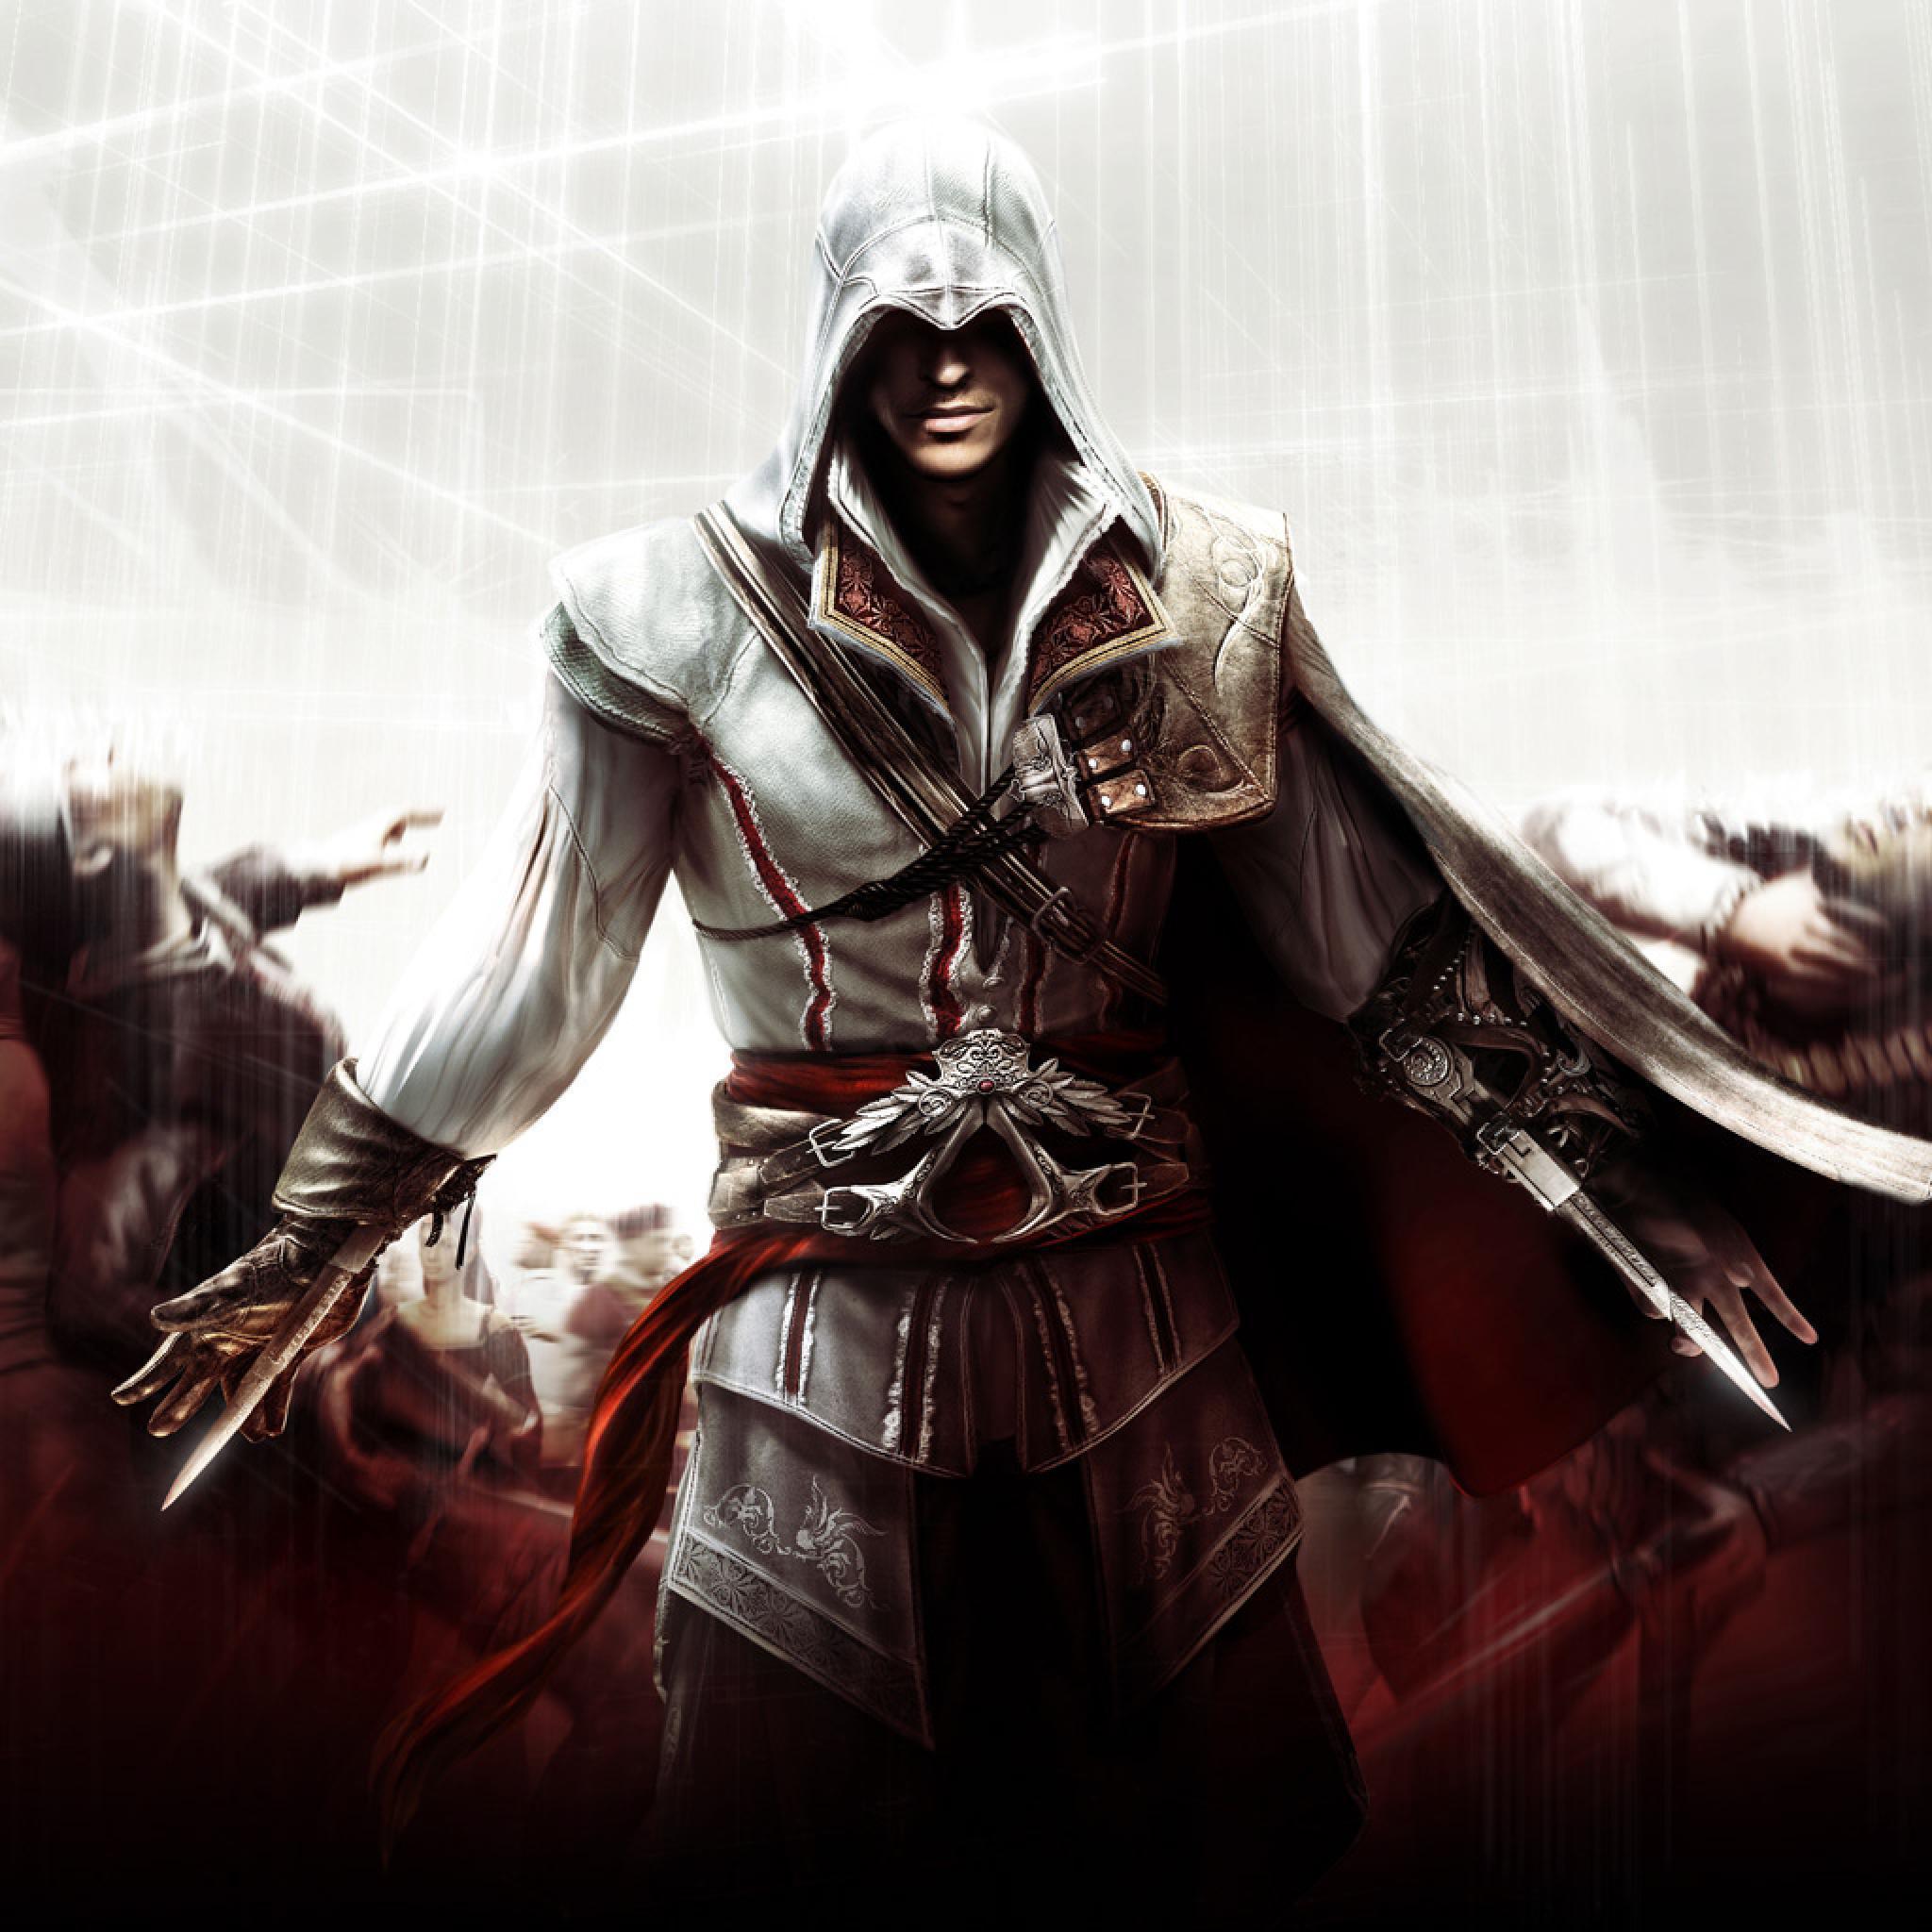 assassins creed 2 download for pc compressed